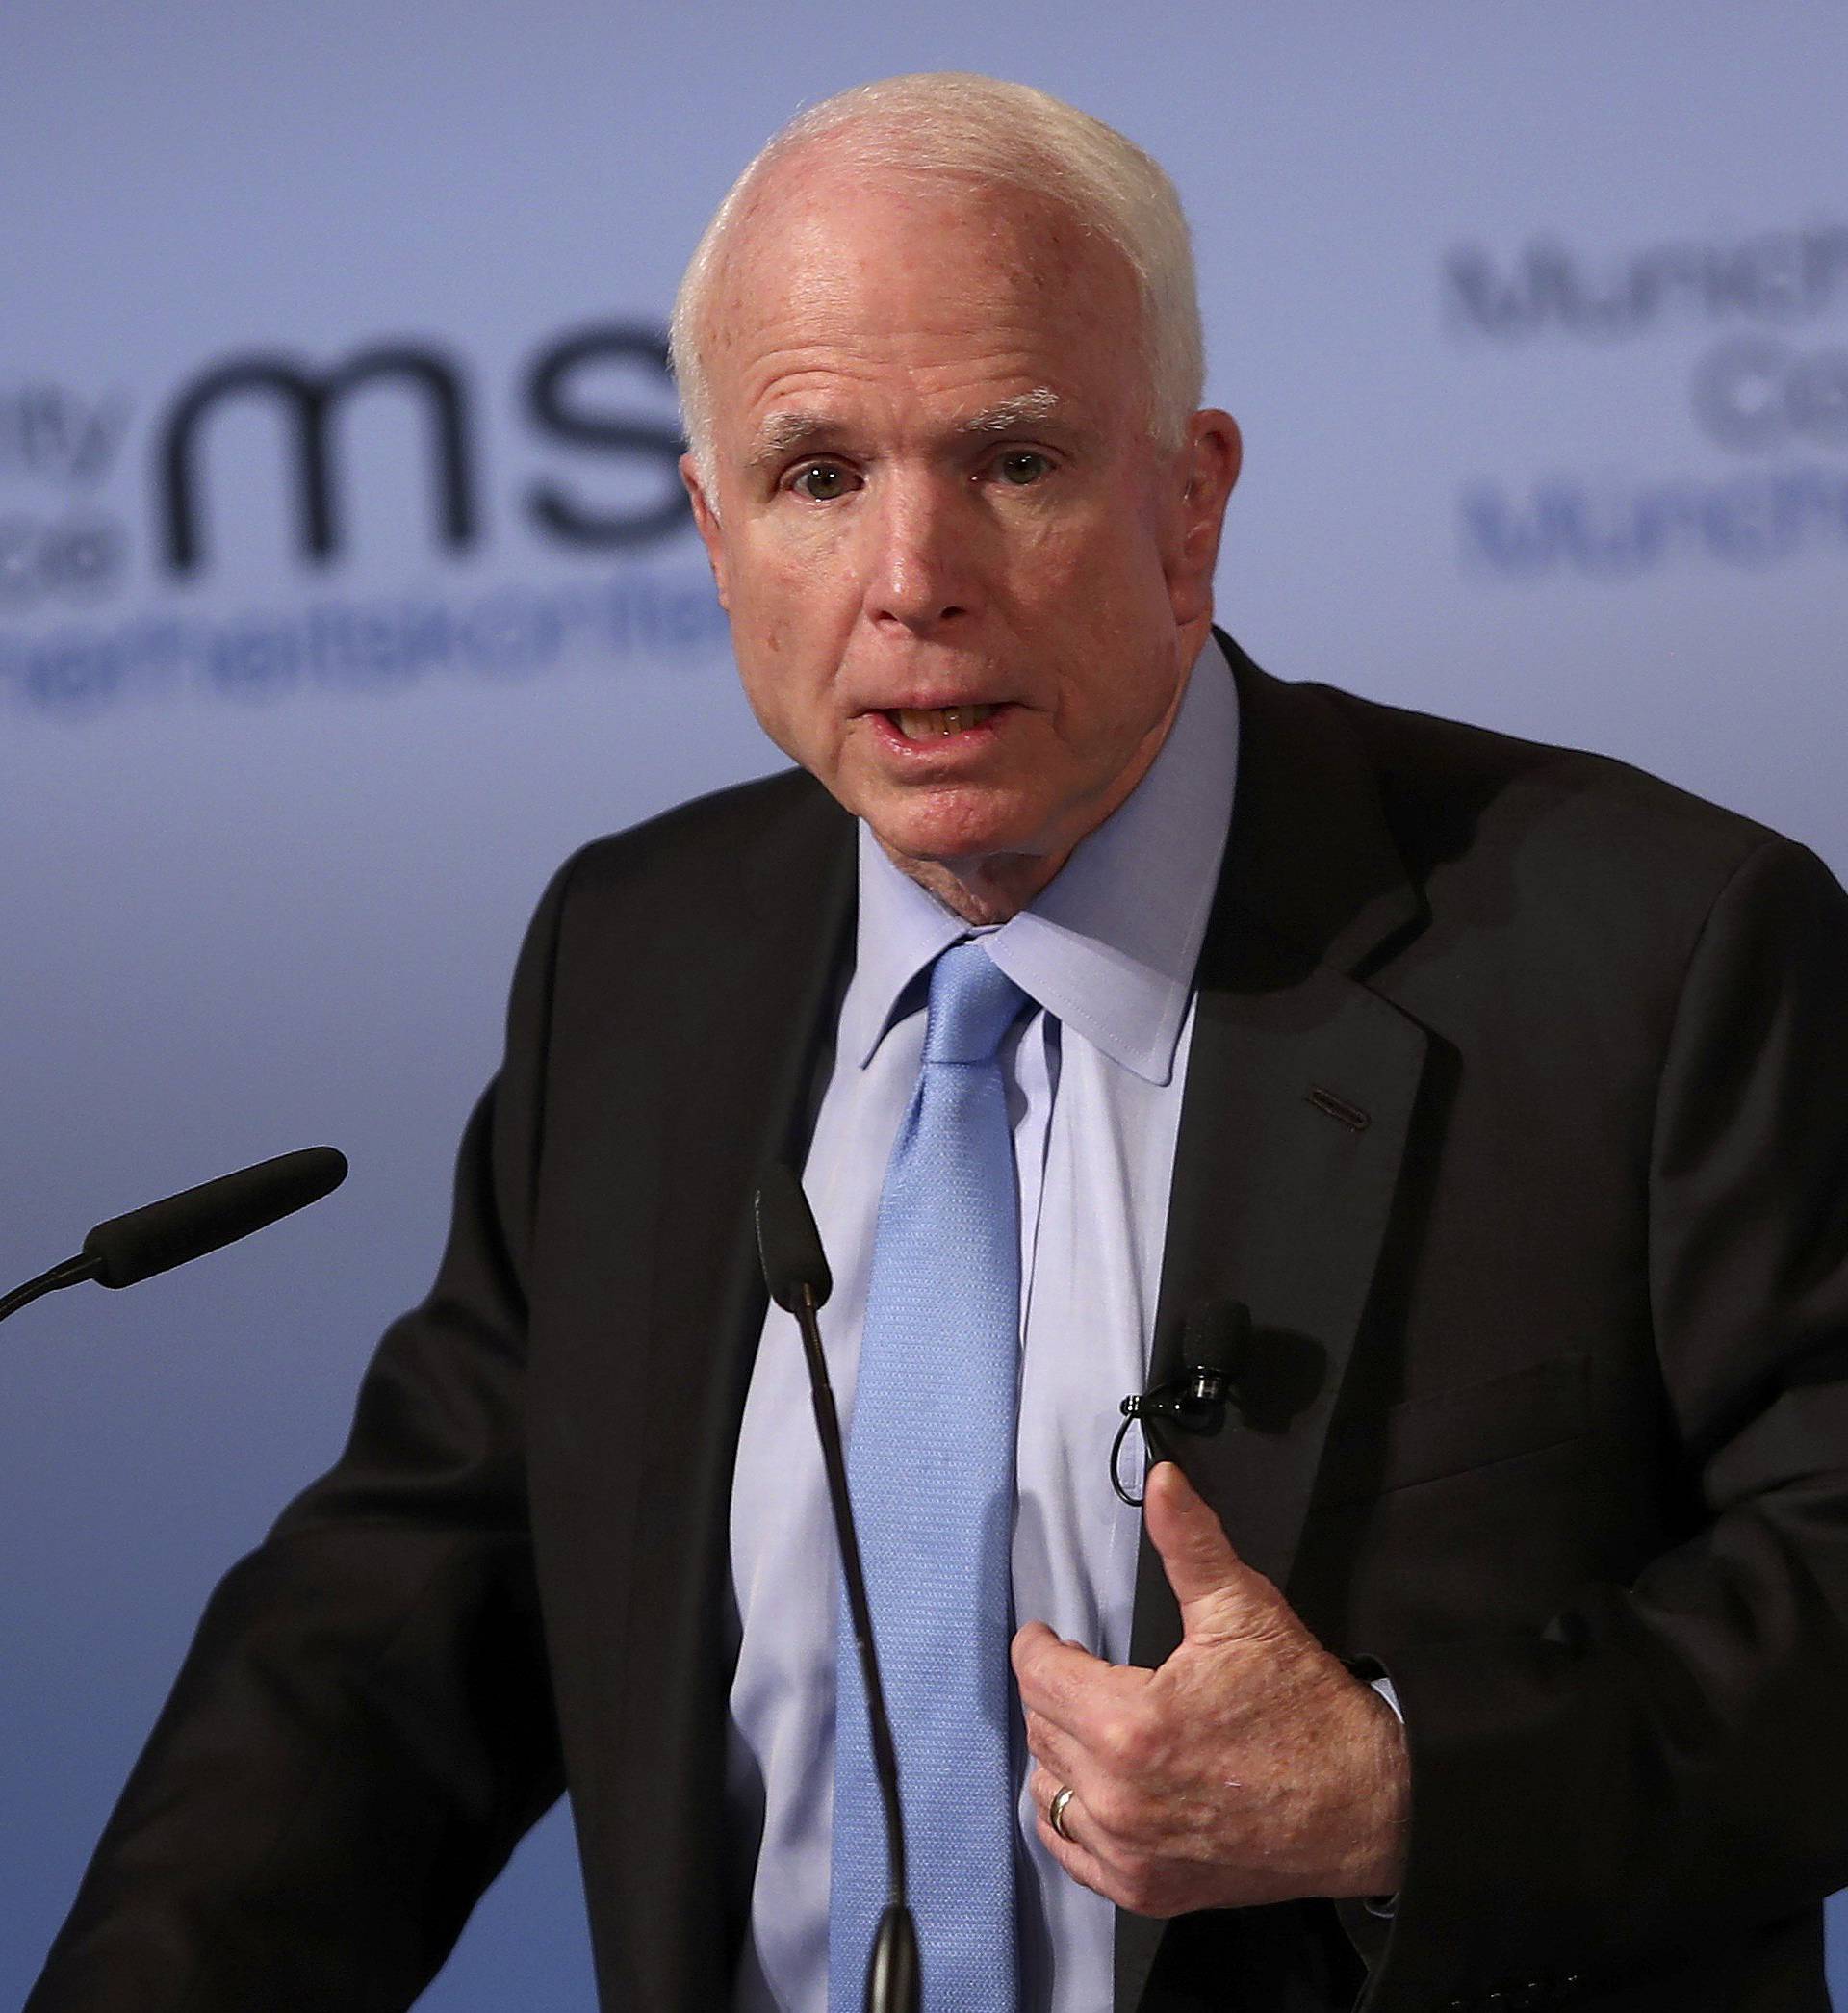 U.S. Senator McCain speaks at the opening of the 53rd Munich Security Conference in Munich